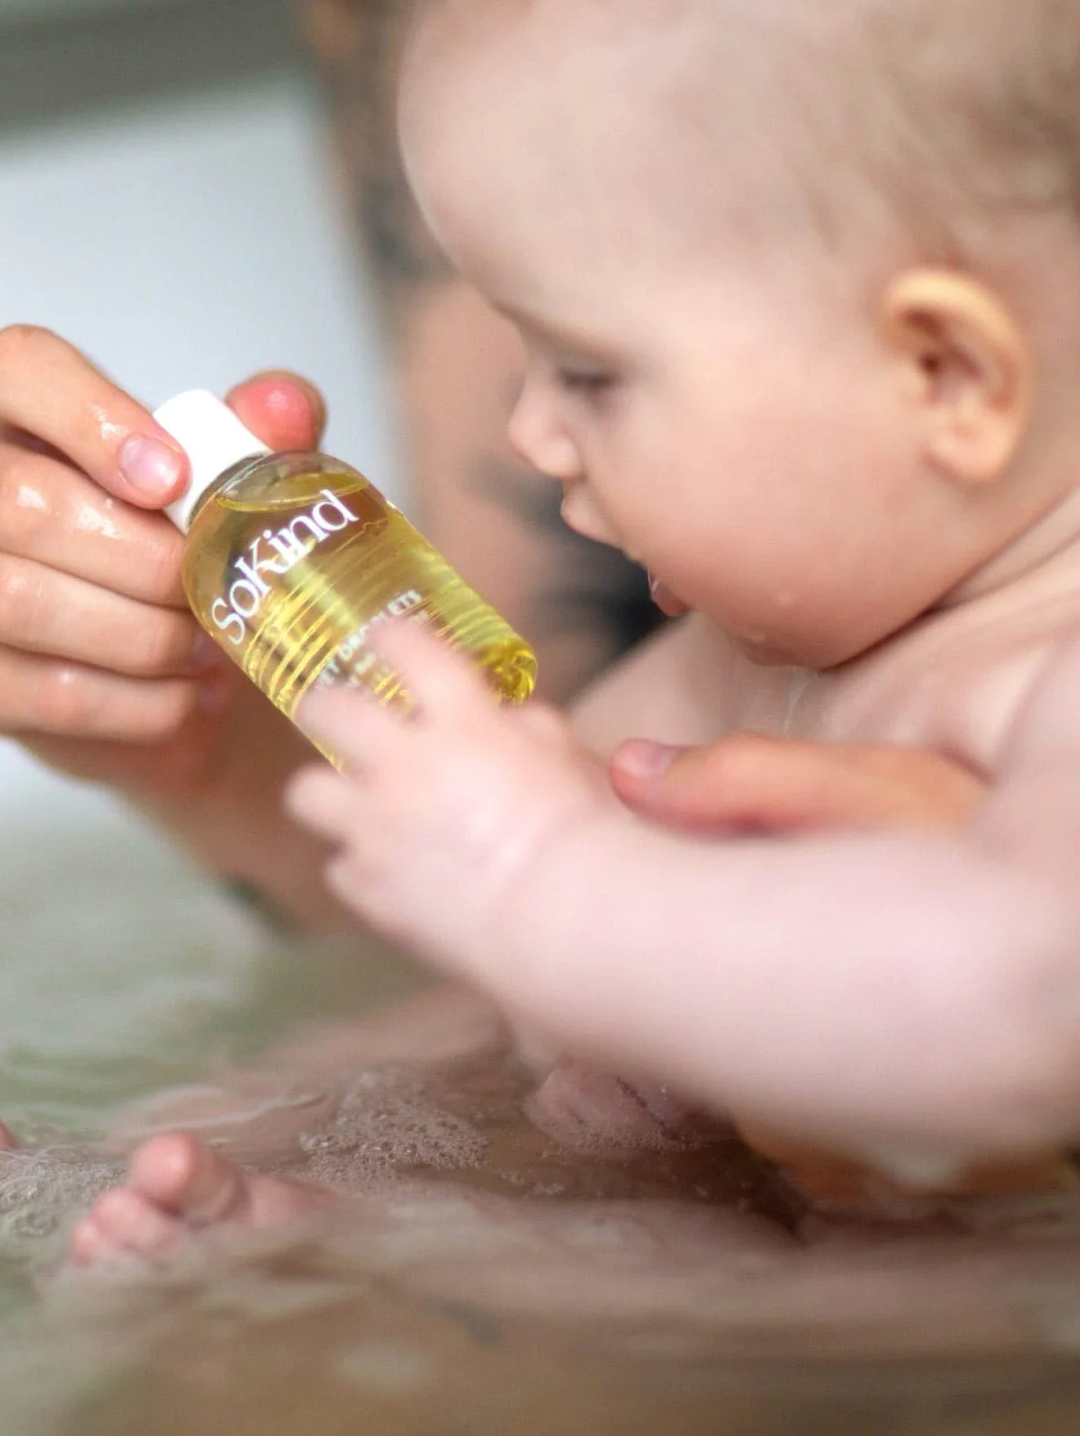 Velvet Droplets from SoKind, a nurturing baby bath oil, baby playing with it in the bath